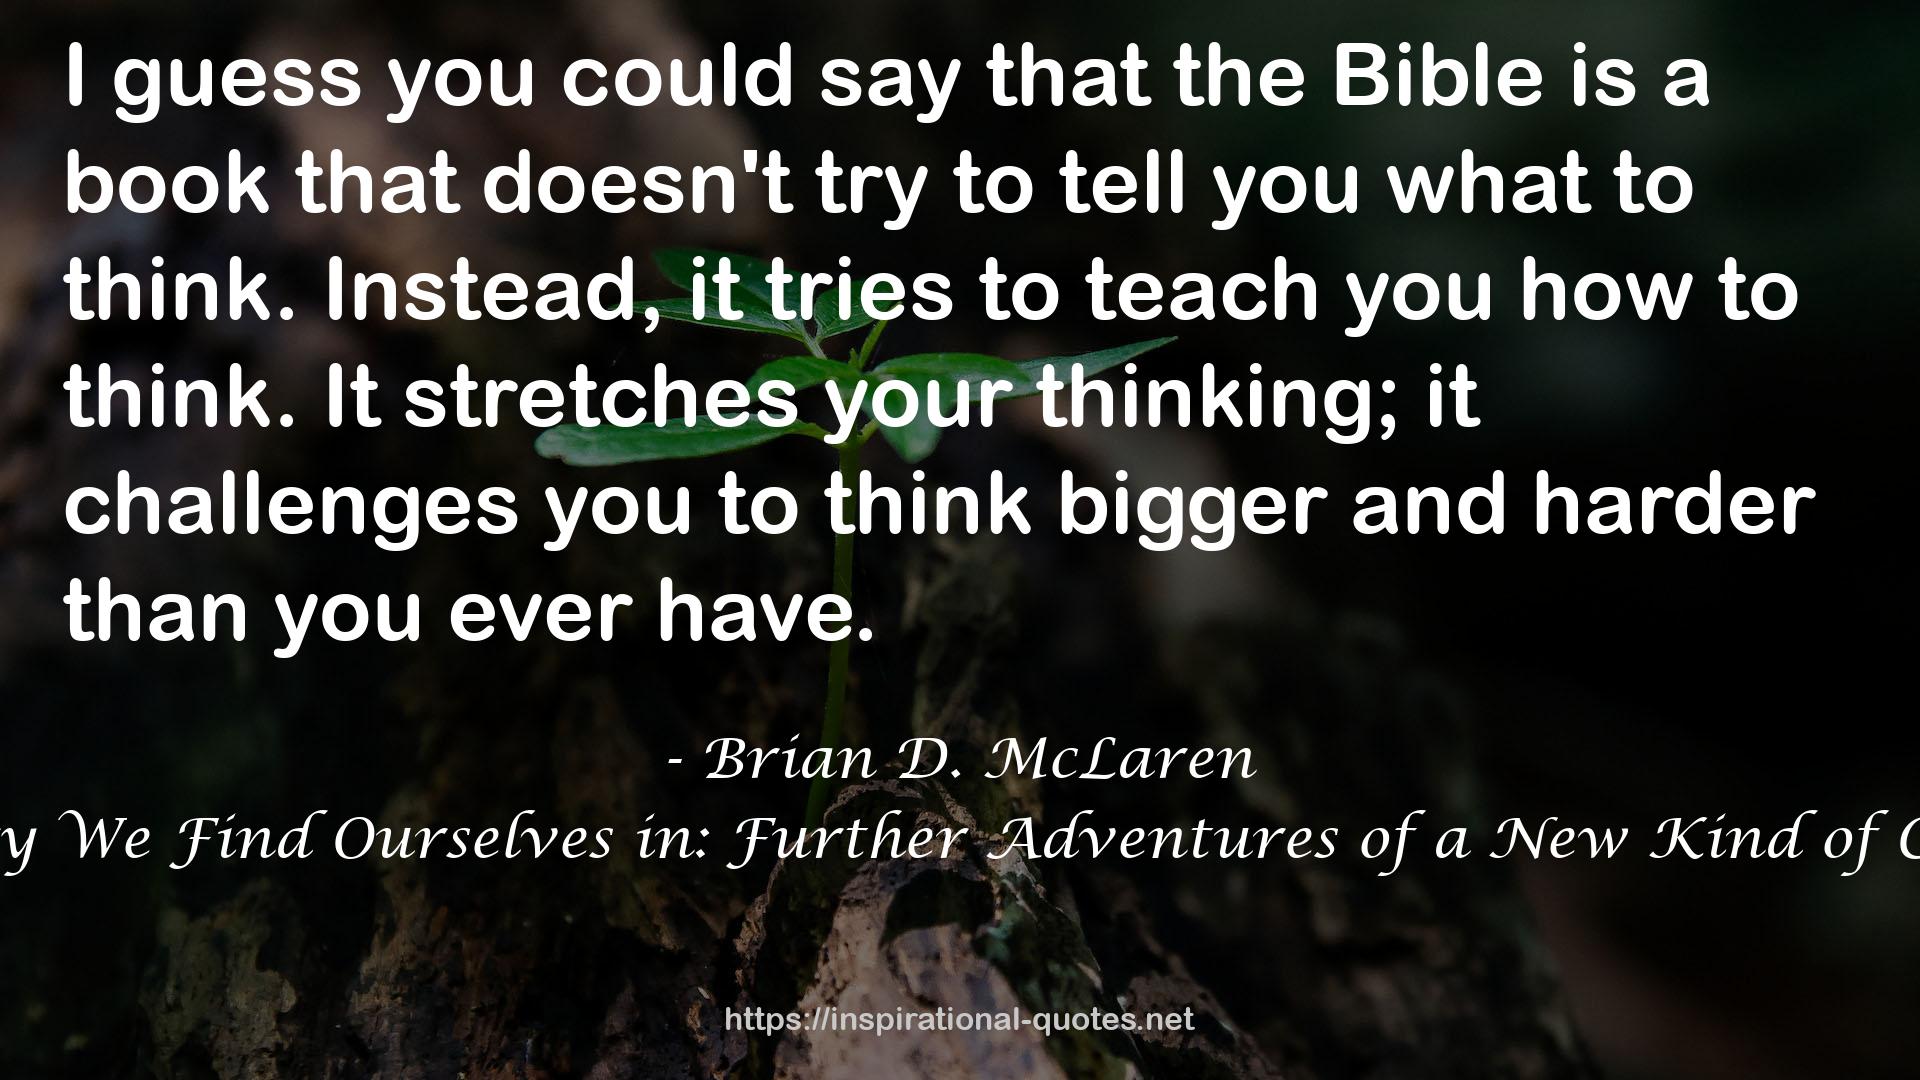 The Story We Find Ourselves in: Further Adventures of a New Kind of Christian QUOTES